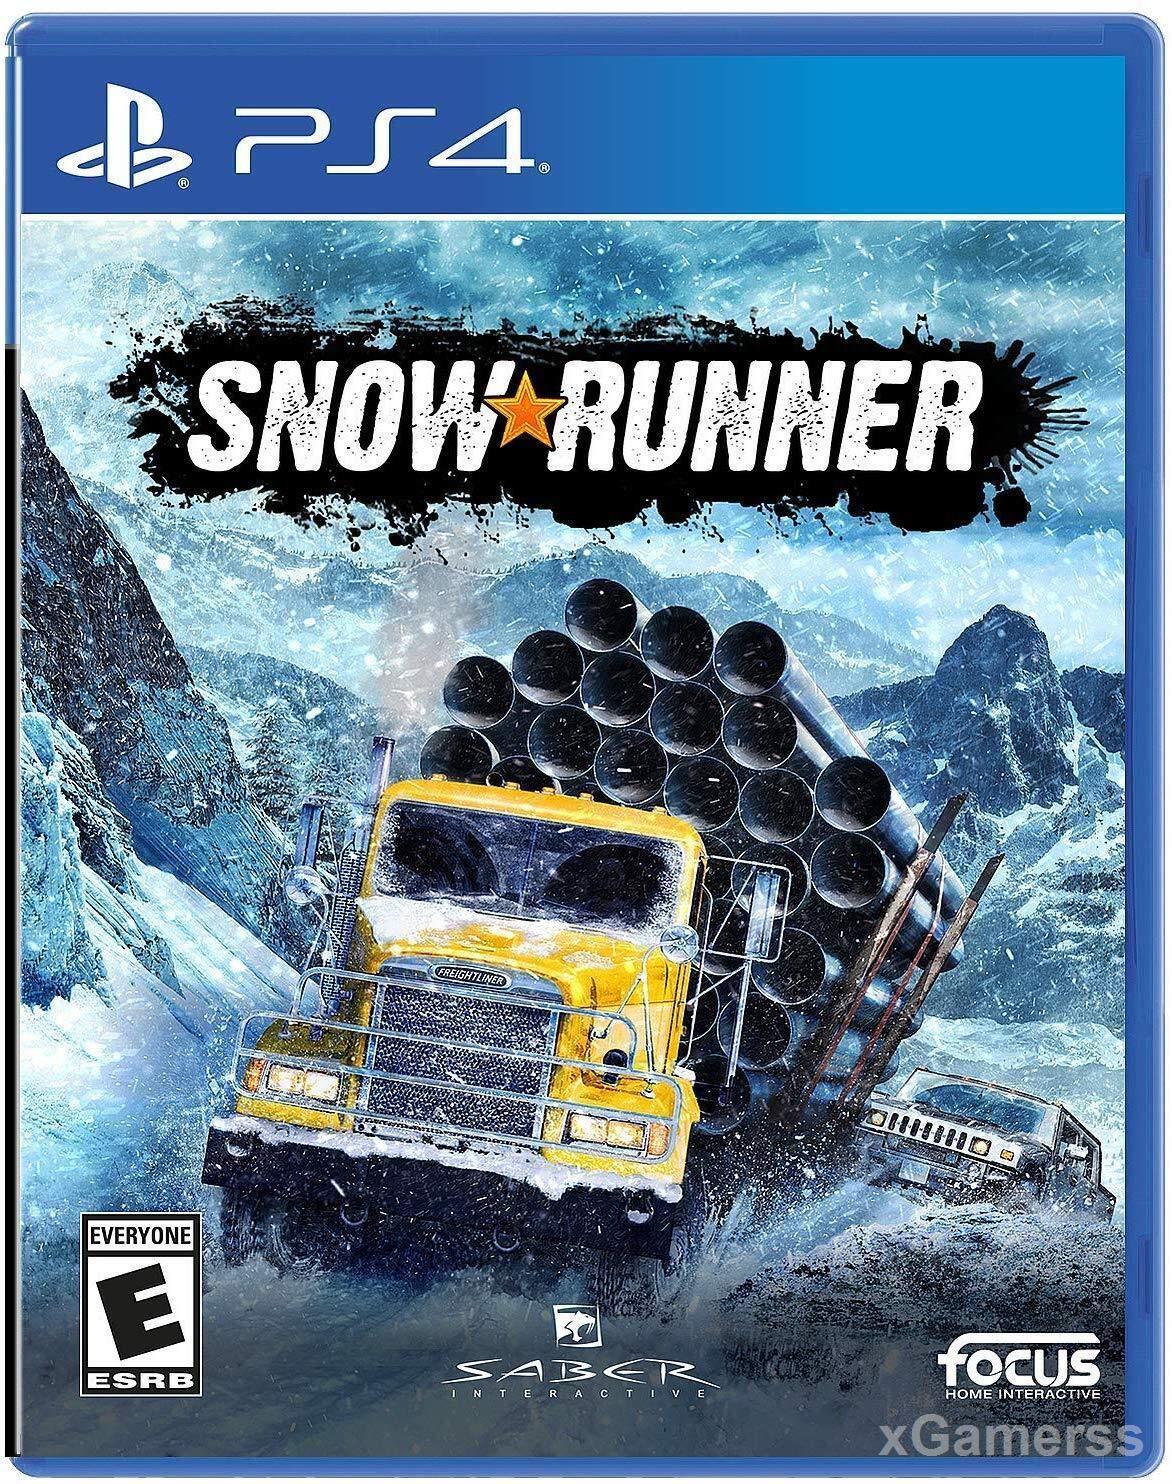 SnowRunner - one of the best off-road vehicle simulators